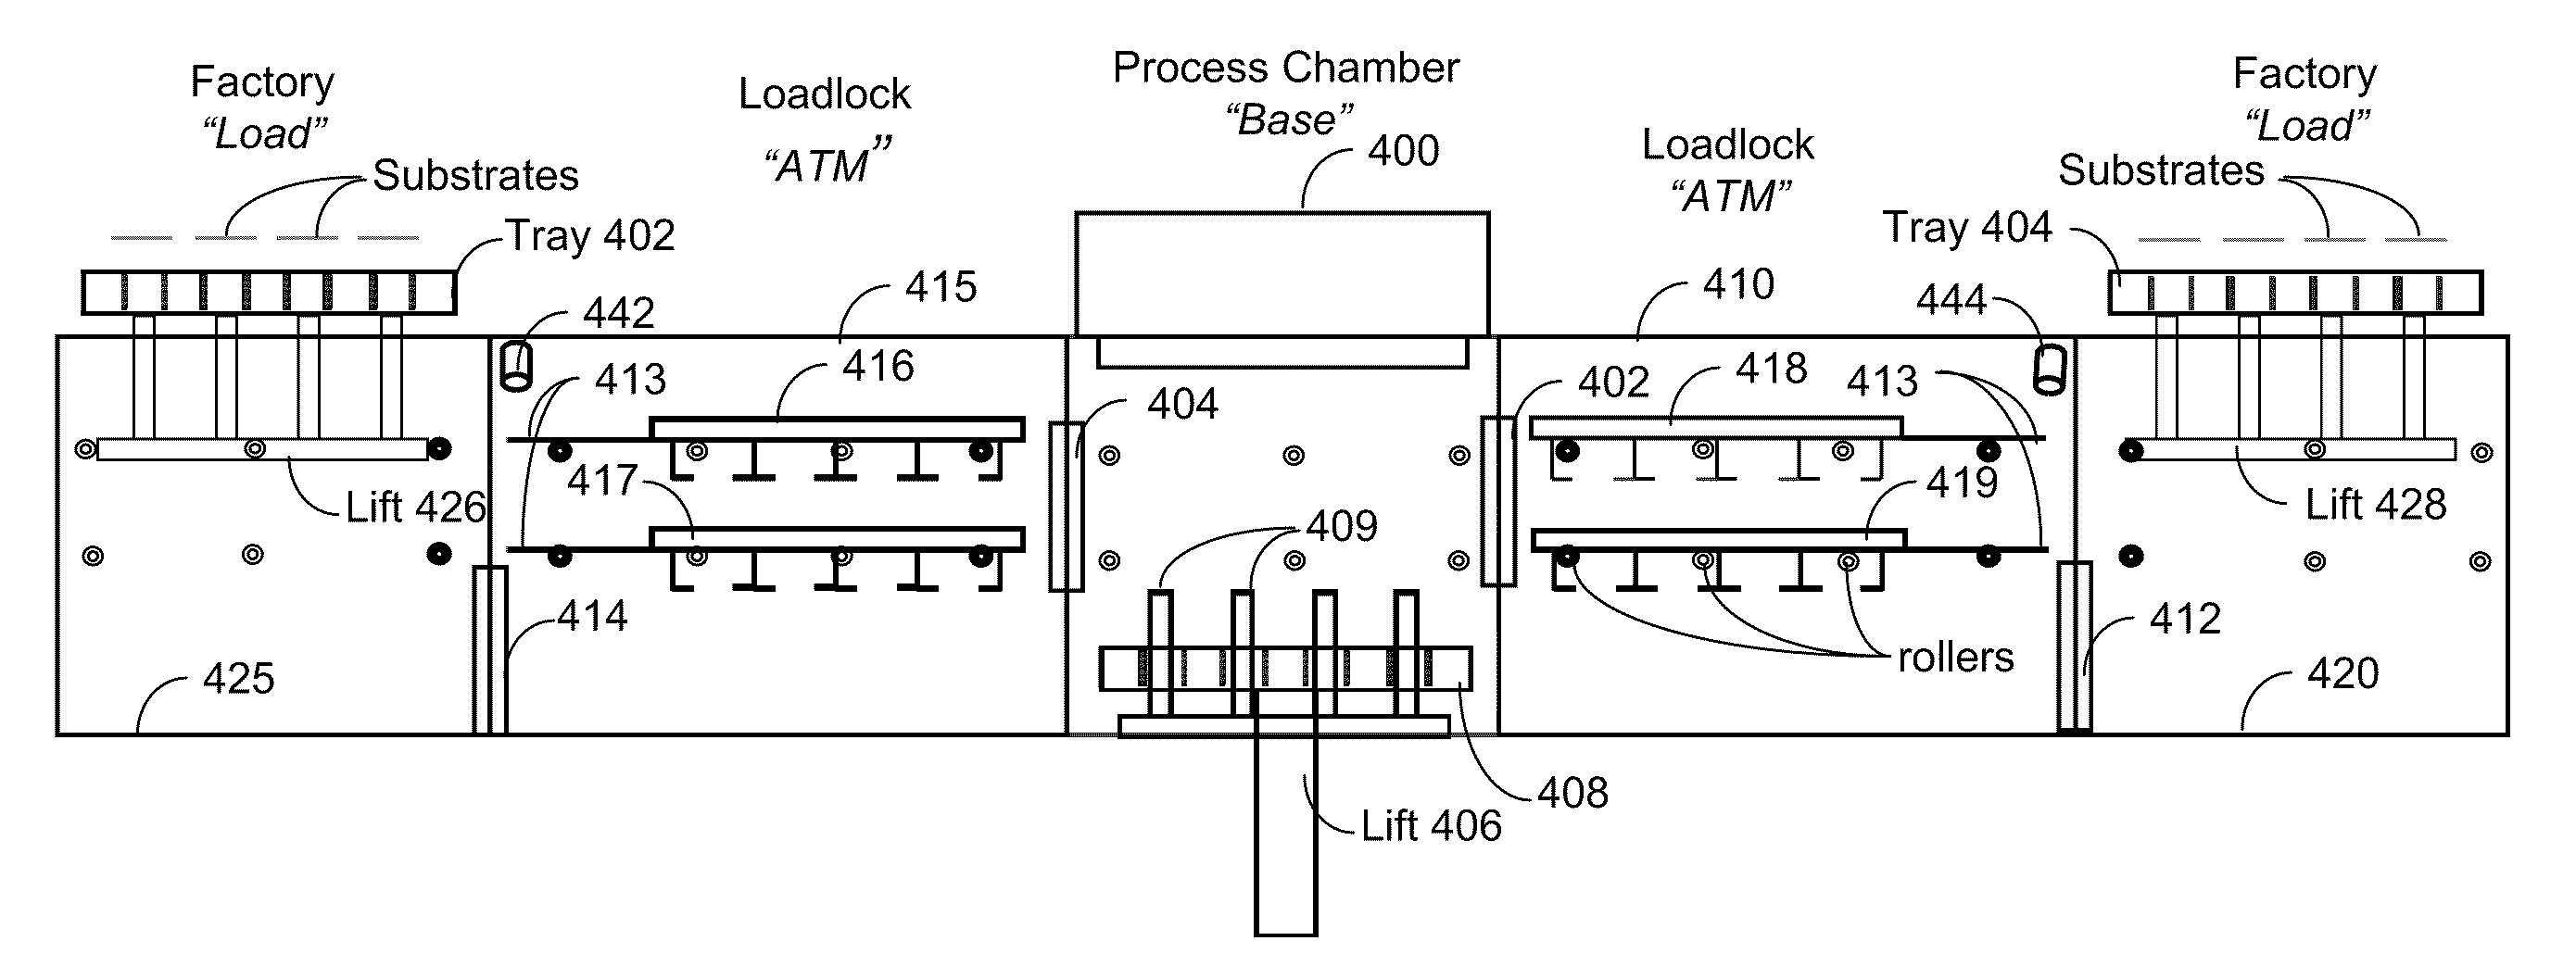 Auto-sequencing multi-directional inline processing apparatus